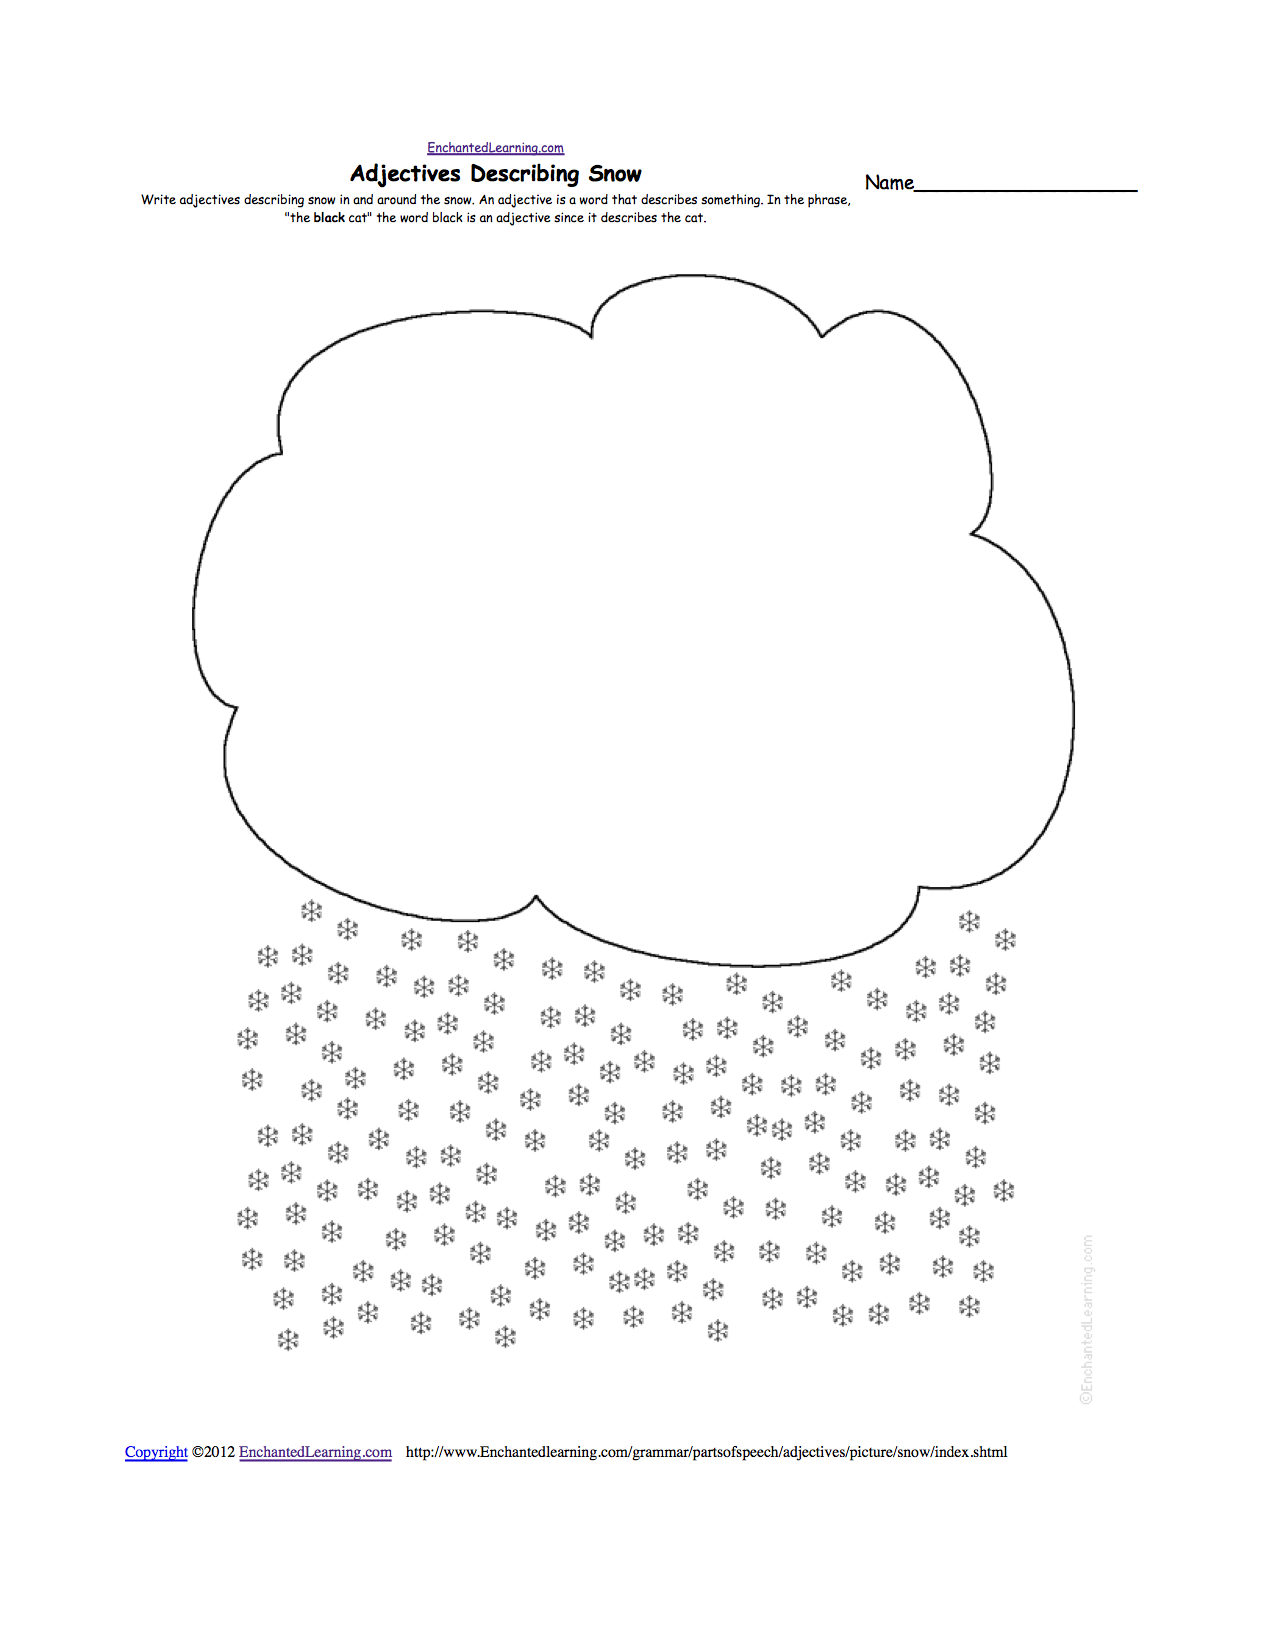 write-adjectives-describing-a-picture-printable-worksheets-enchantedlearning